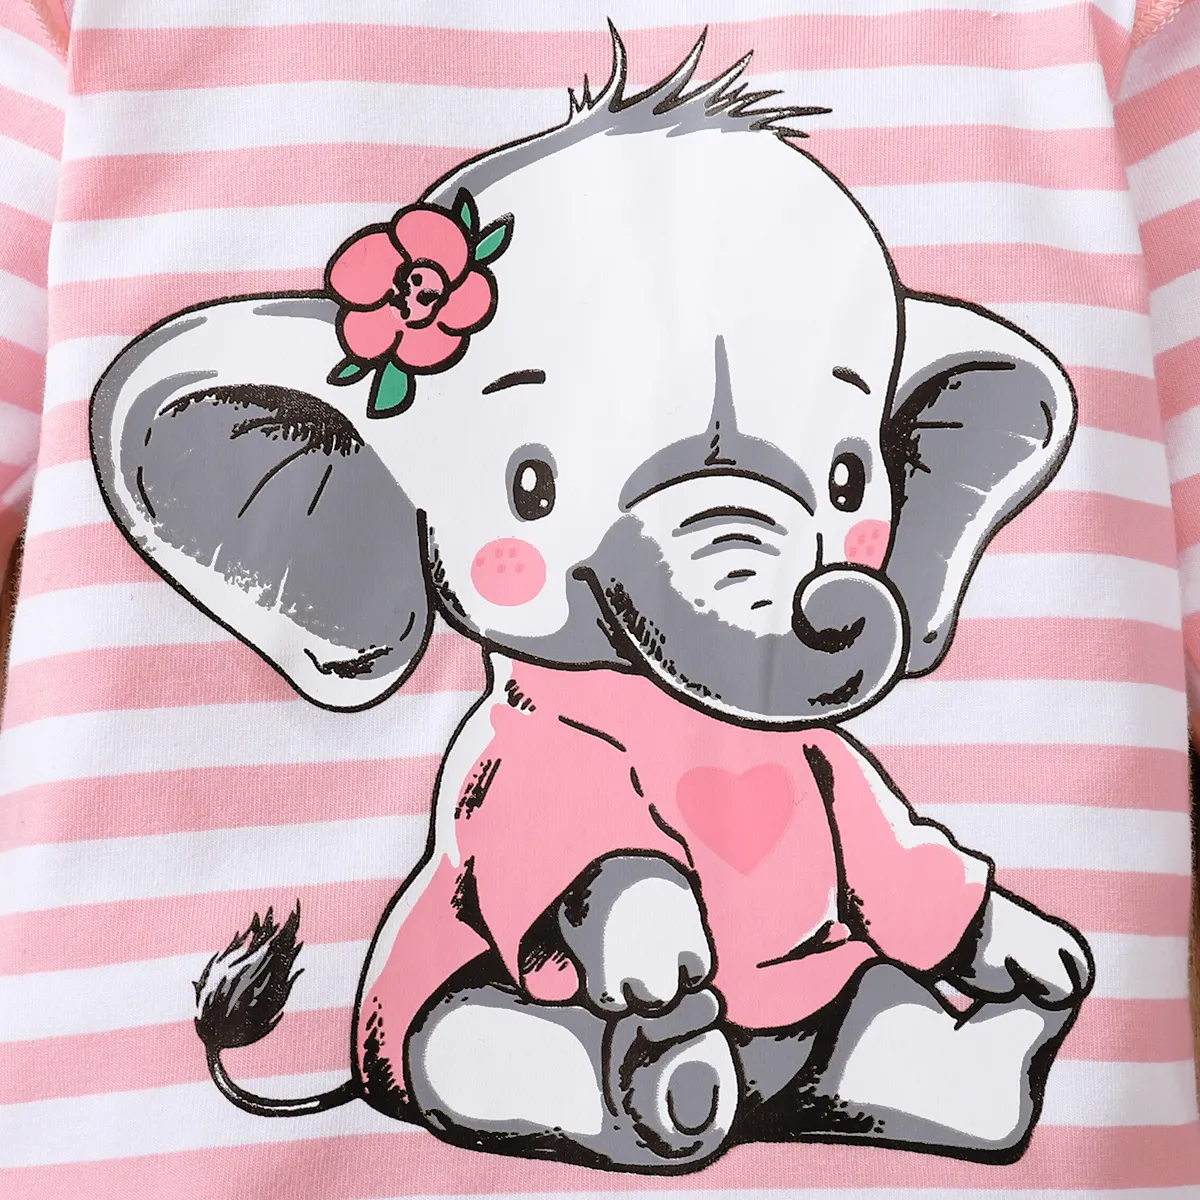 2pcs Baby Girl 95% Cotton Long-sleeve Cartoon Elephant Print Grey Striped Top and Trousers Set Pink big image 1